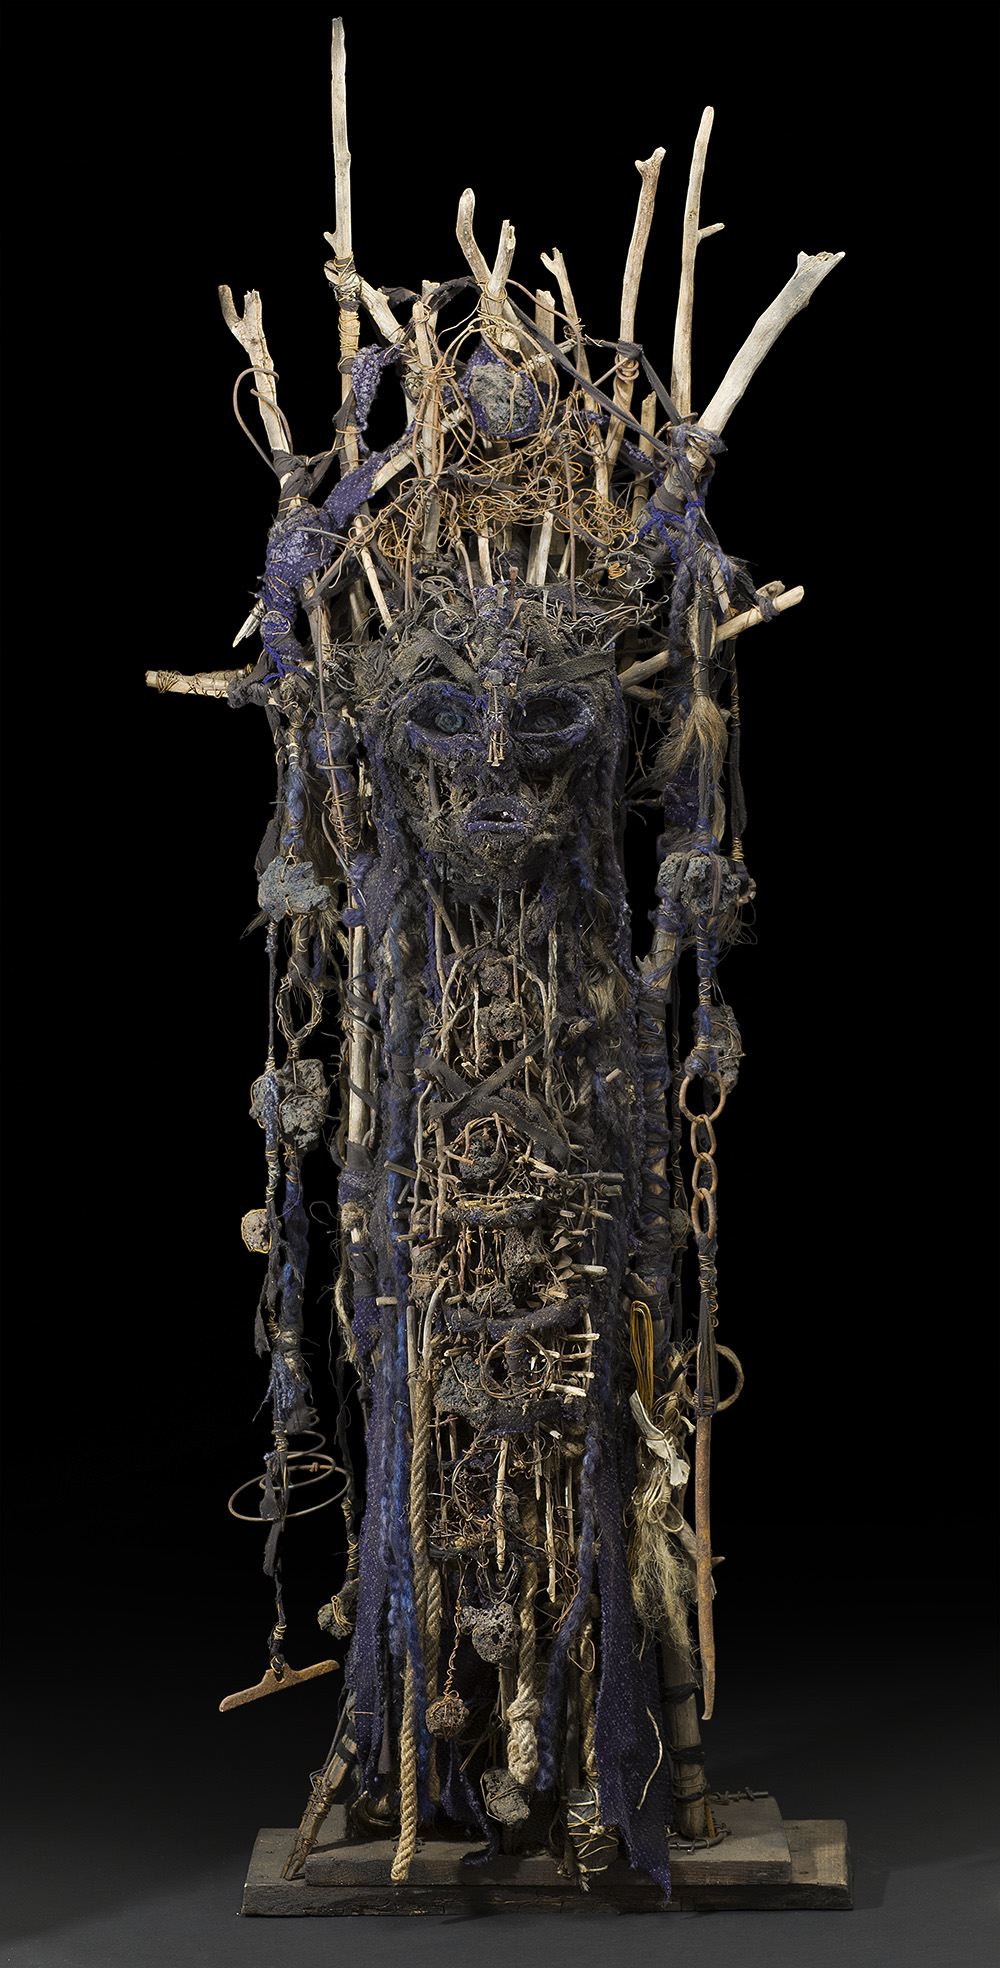   Sylvain and Ghyslaine Staelens    Totem   , 2015 Wood, metal, cloth, found objects 73 x 25 x 11 inches 185.4 x 63.5 x 27.9 cm GSS 44 